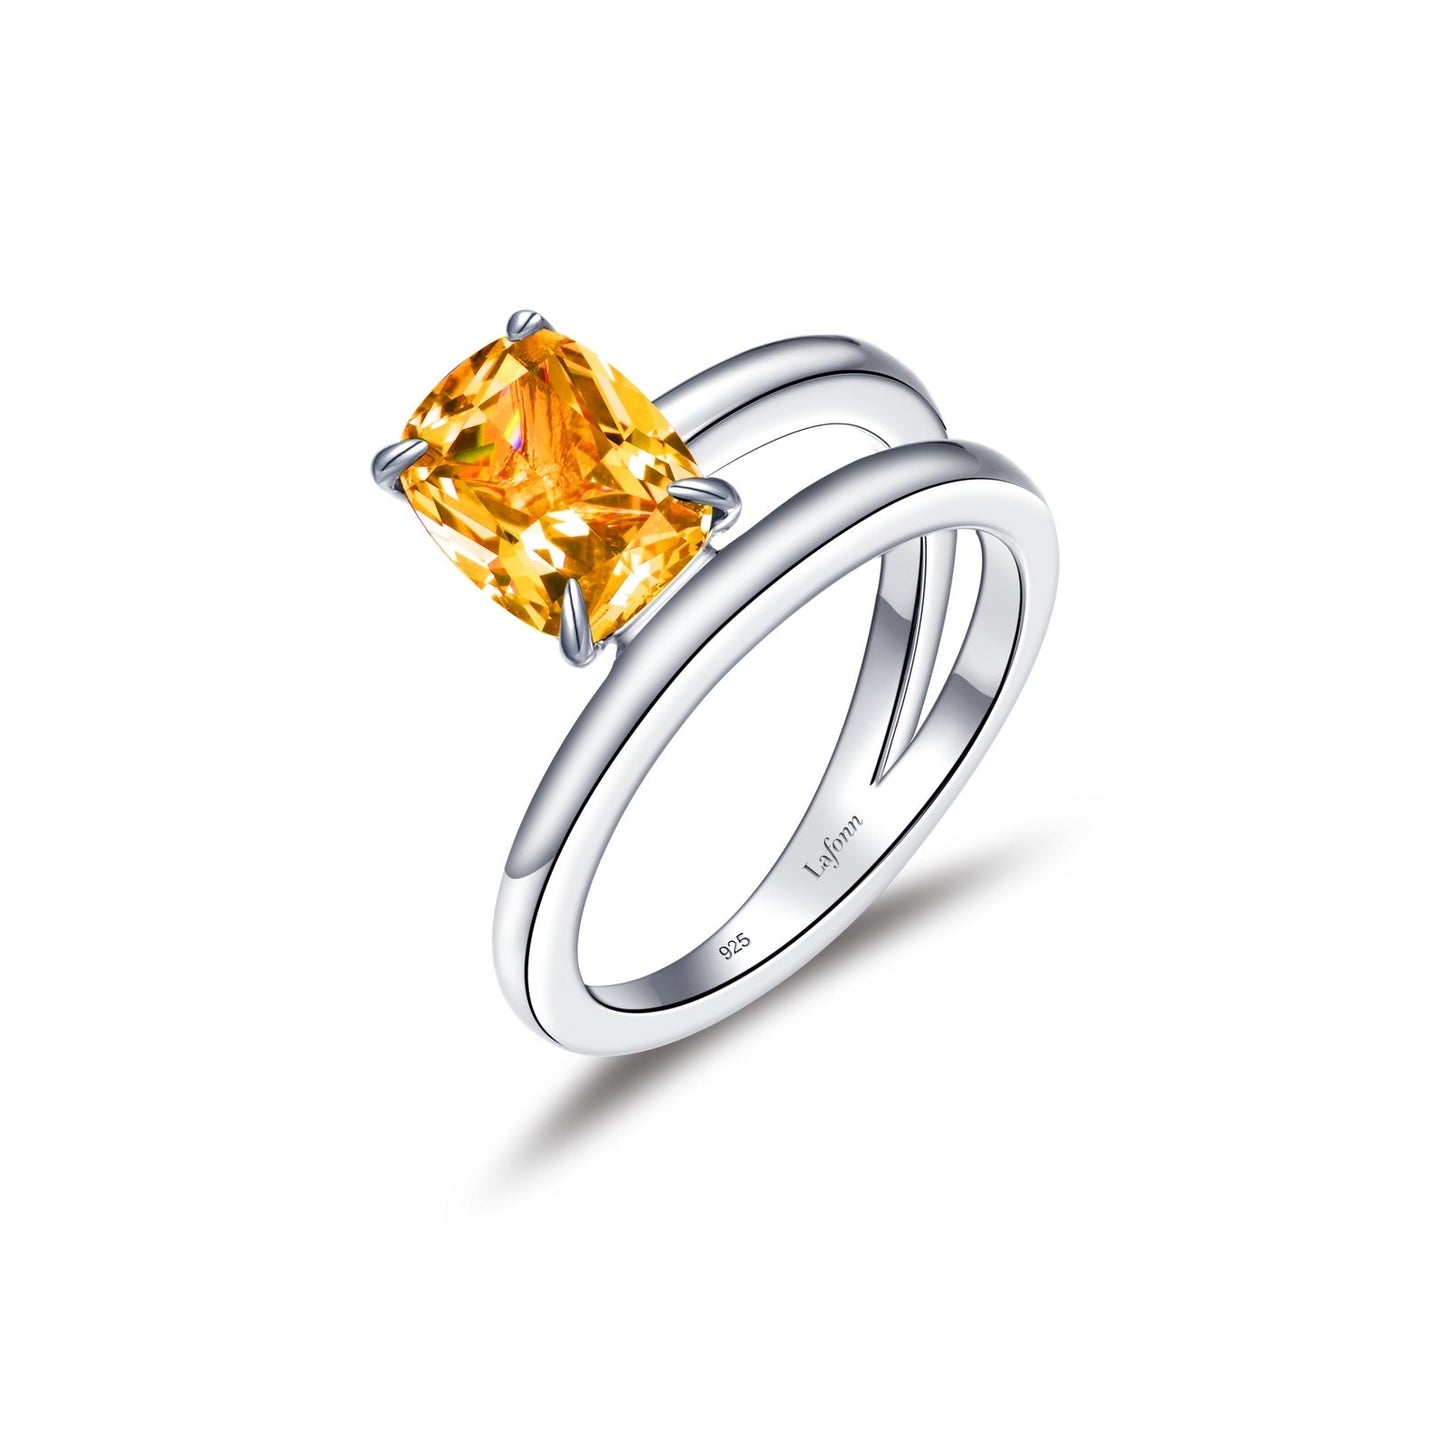 Load image into Gallery viewer, Lafonn Fancy Lab-Grown Sapphire Solitaire Ring YELLOW CORUNDUM RINGS Size 5 Platinum Appx CTW: 3.0 cts. CTS Approx. 10.5 mm (W)
